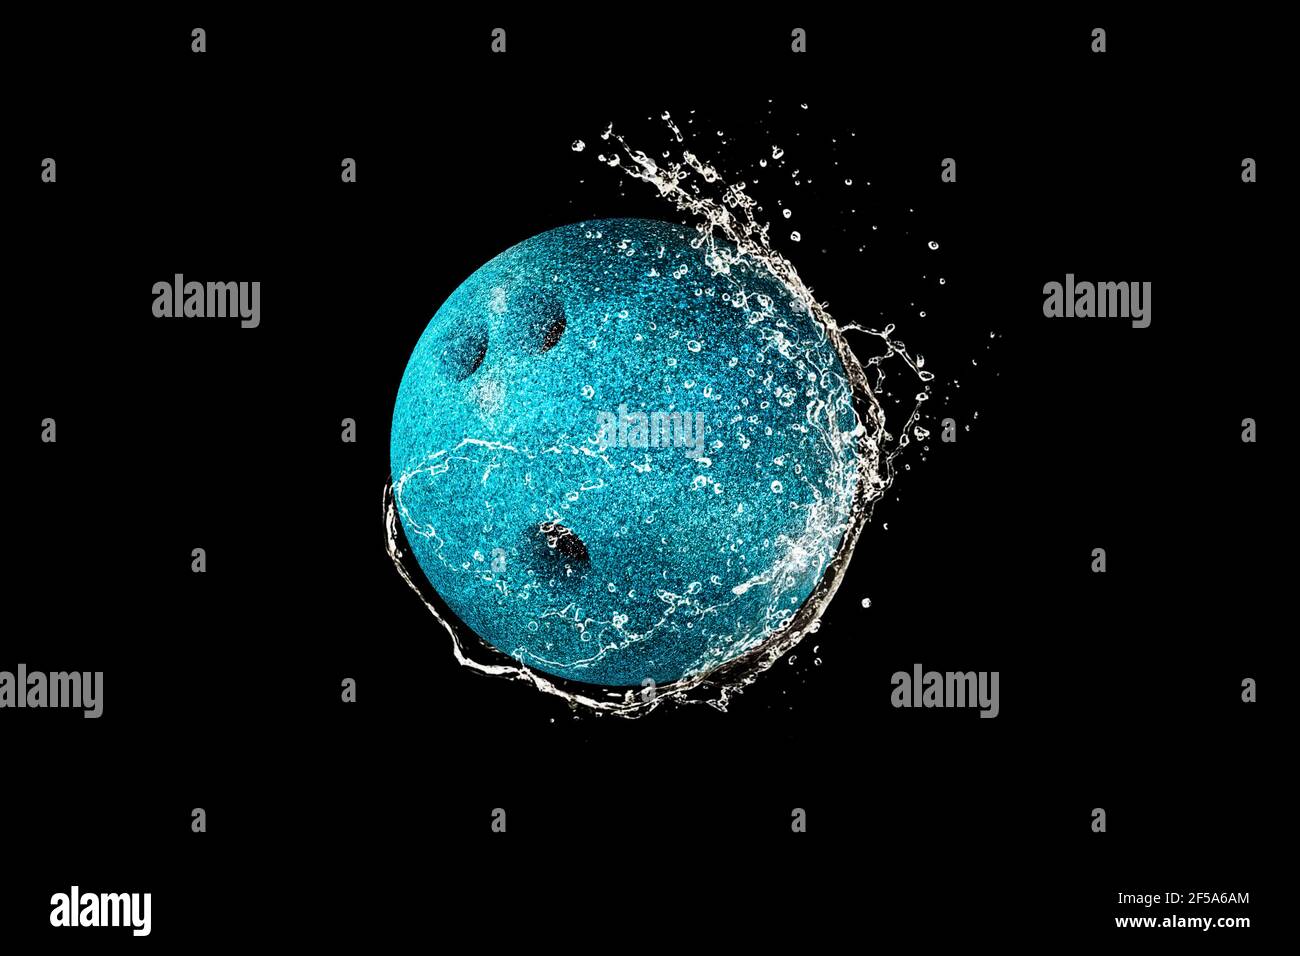 Bowling ball in water drops and splashes isolated on black background Stock Photo